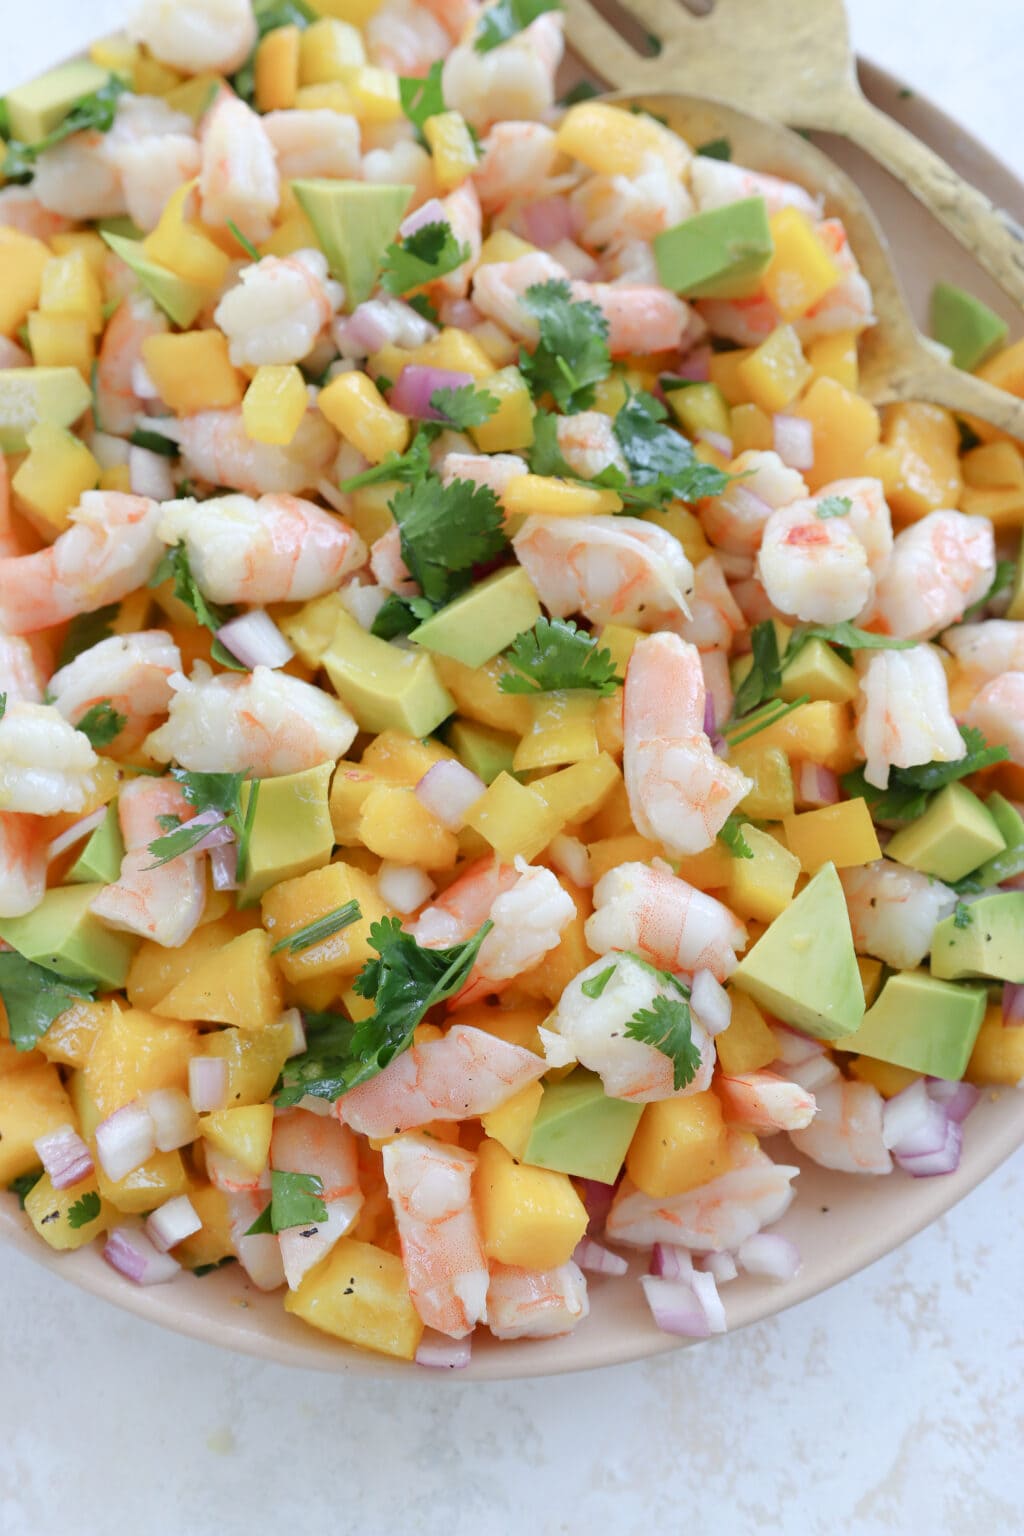 An overhead shot of a salad on a pink plate. The salad has cubed mango, cubed avocado, chopped shrimp and cilantro in it.